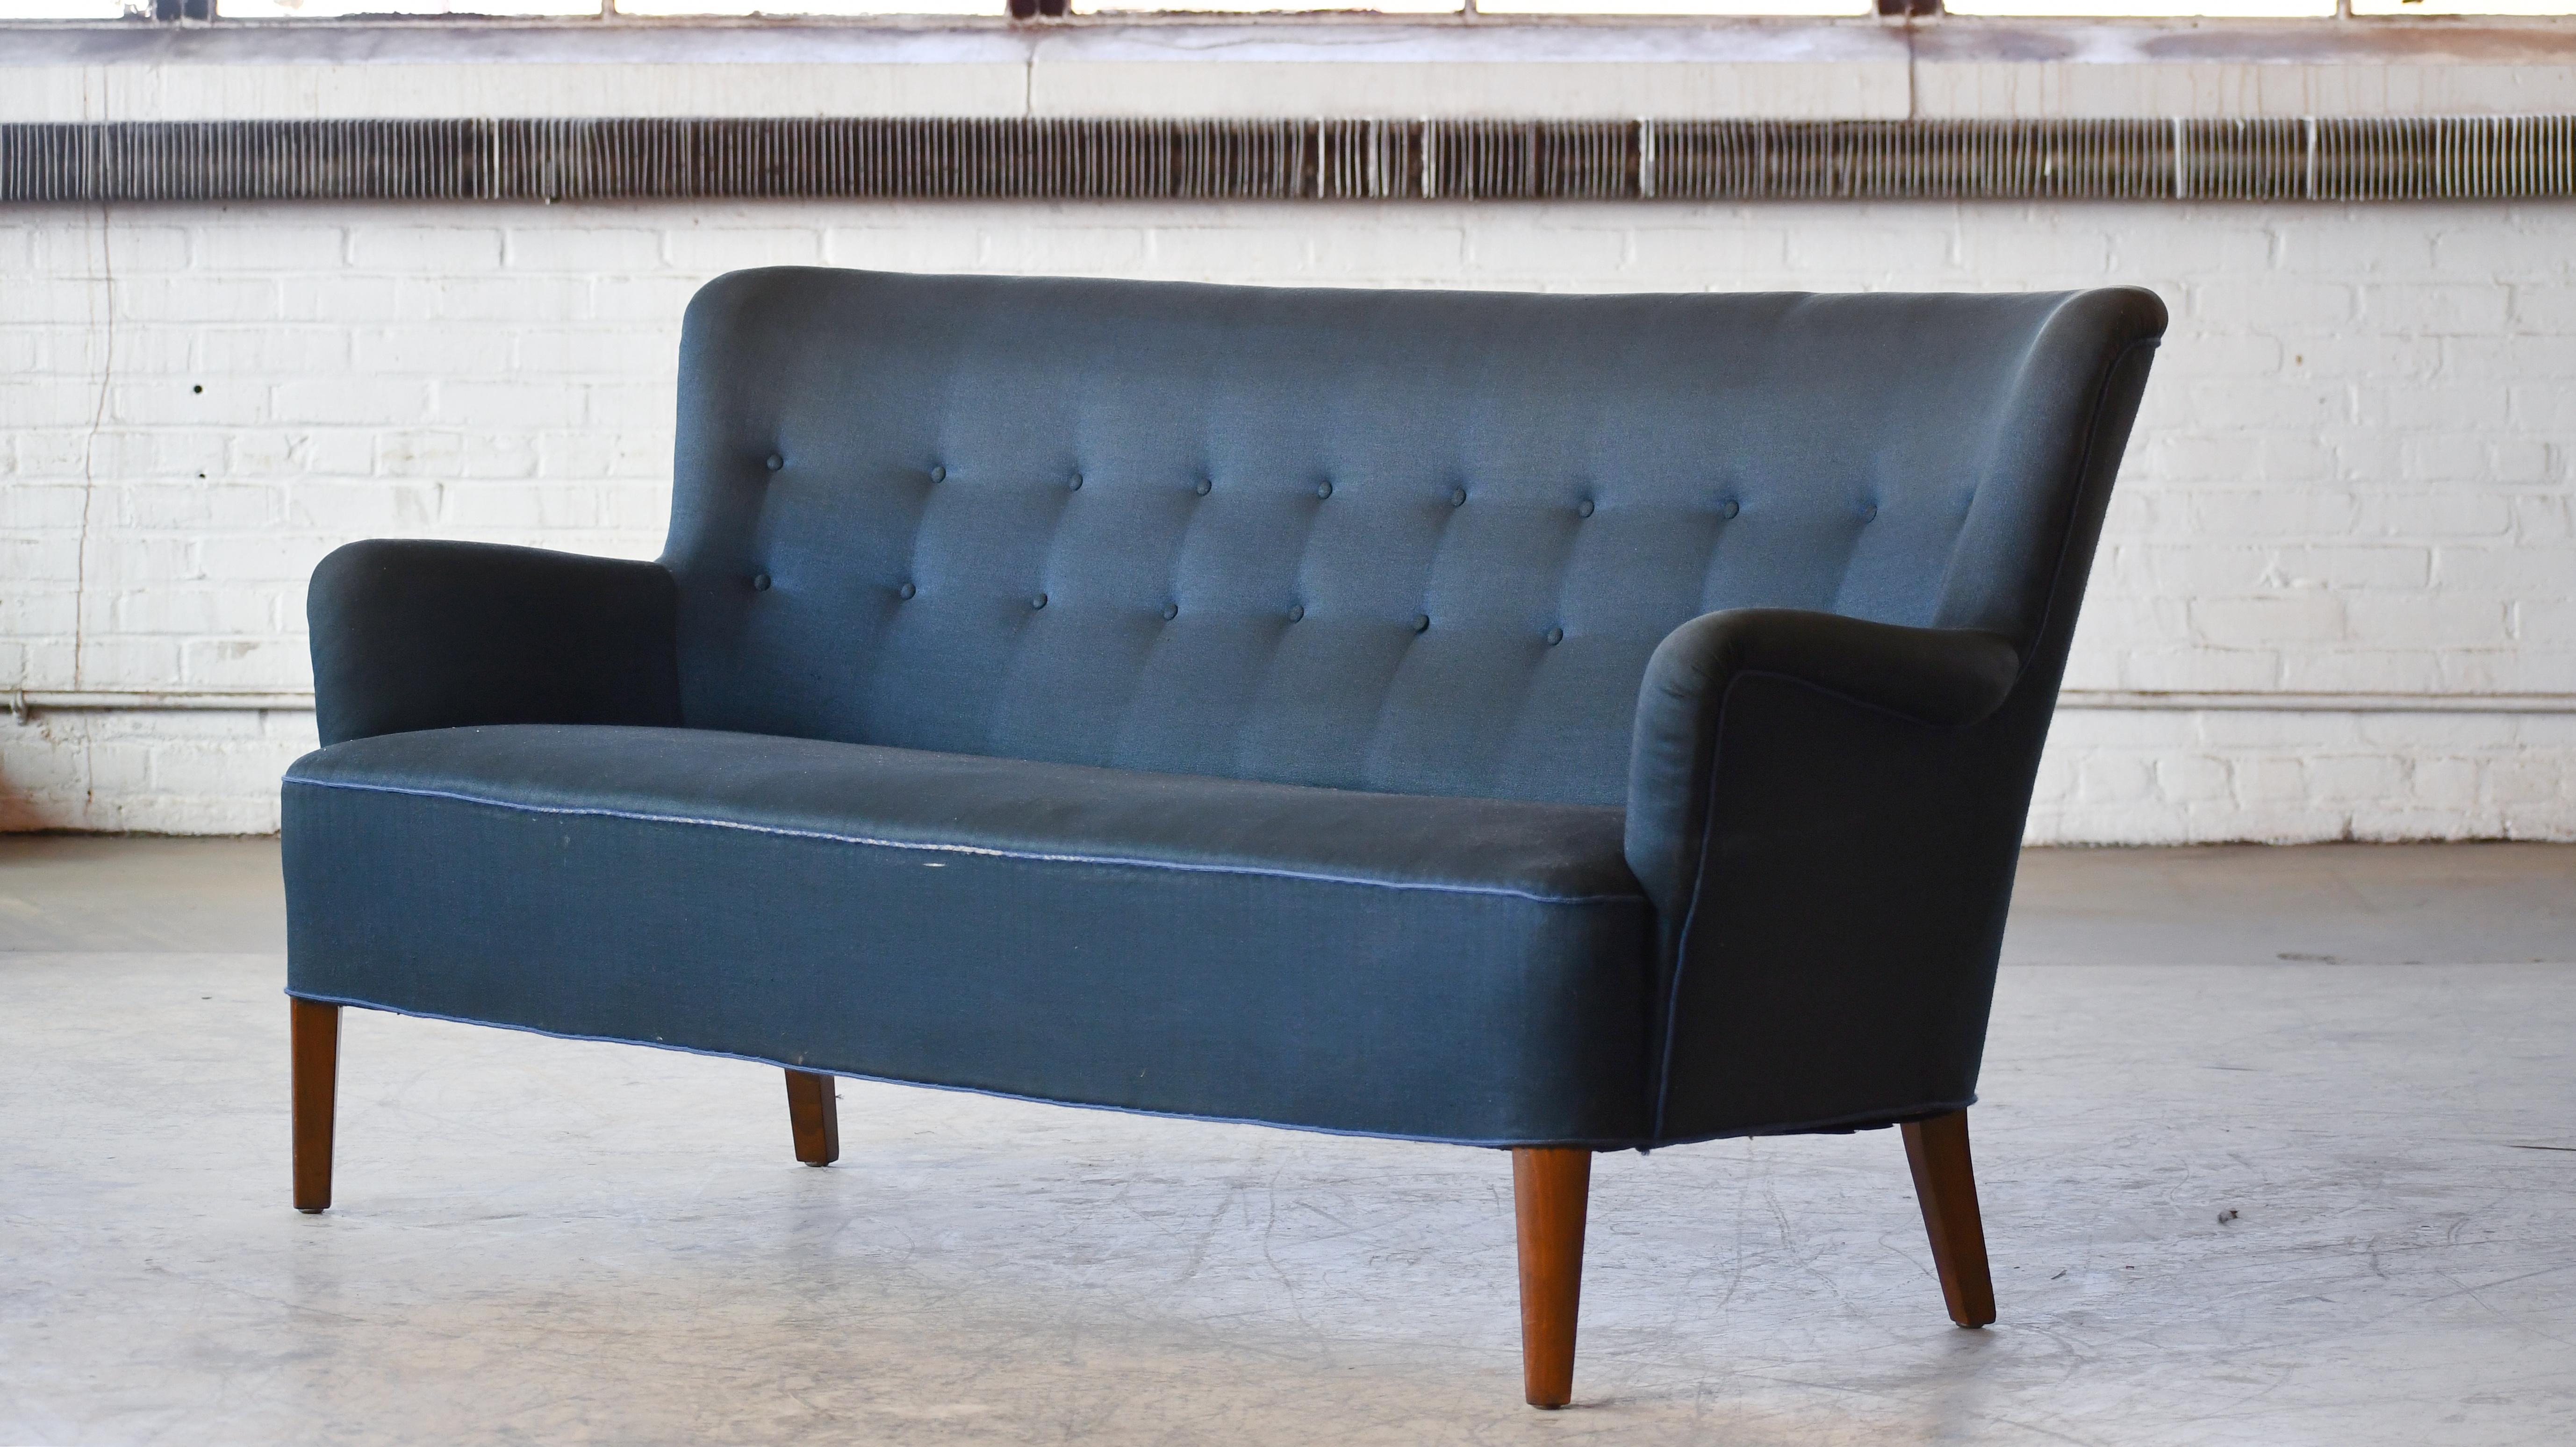 Orla Mølgaard-Nielsen's significant work has been mainly carried out together with his partner, Peter Hvidt, but the designer’s earlier models - like this sofa - are widely renowned for their understated elegance and quality. This rare sofa was